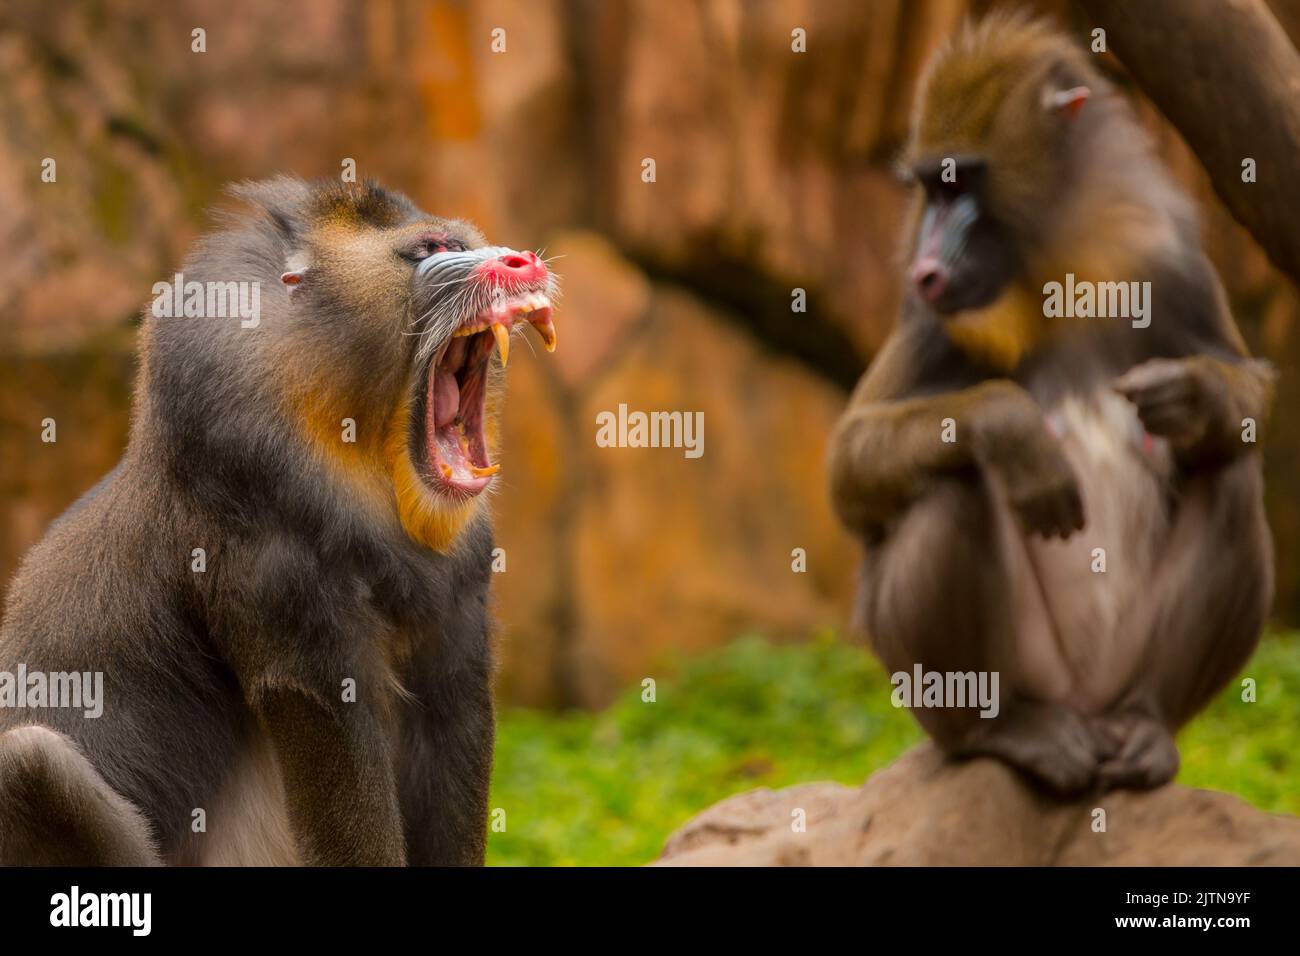 a mandril monkey opens its mouth and canine teeth appear in front of its partner Stock Photo